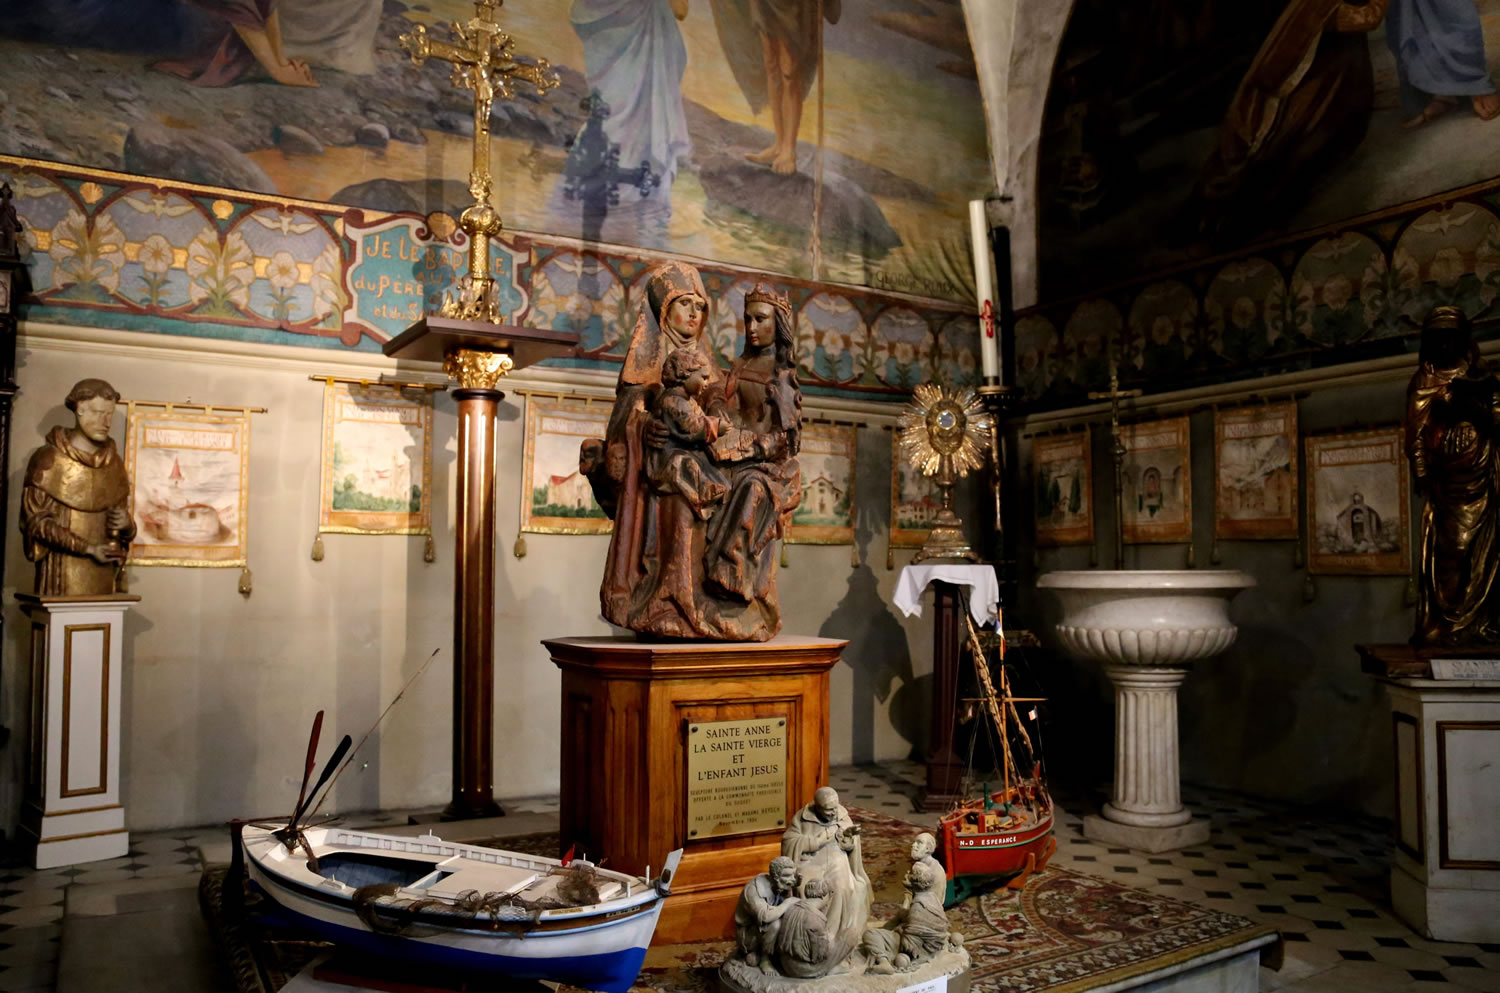 This picture taken May 11, 2014, shows the interior of Notre-Dame d'Esperance, a Gothic church in Cannes that commemorates the town's origins as a fishing village. The church is open daily and admission is free.